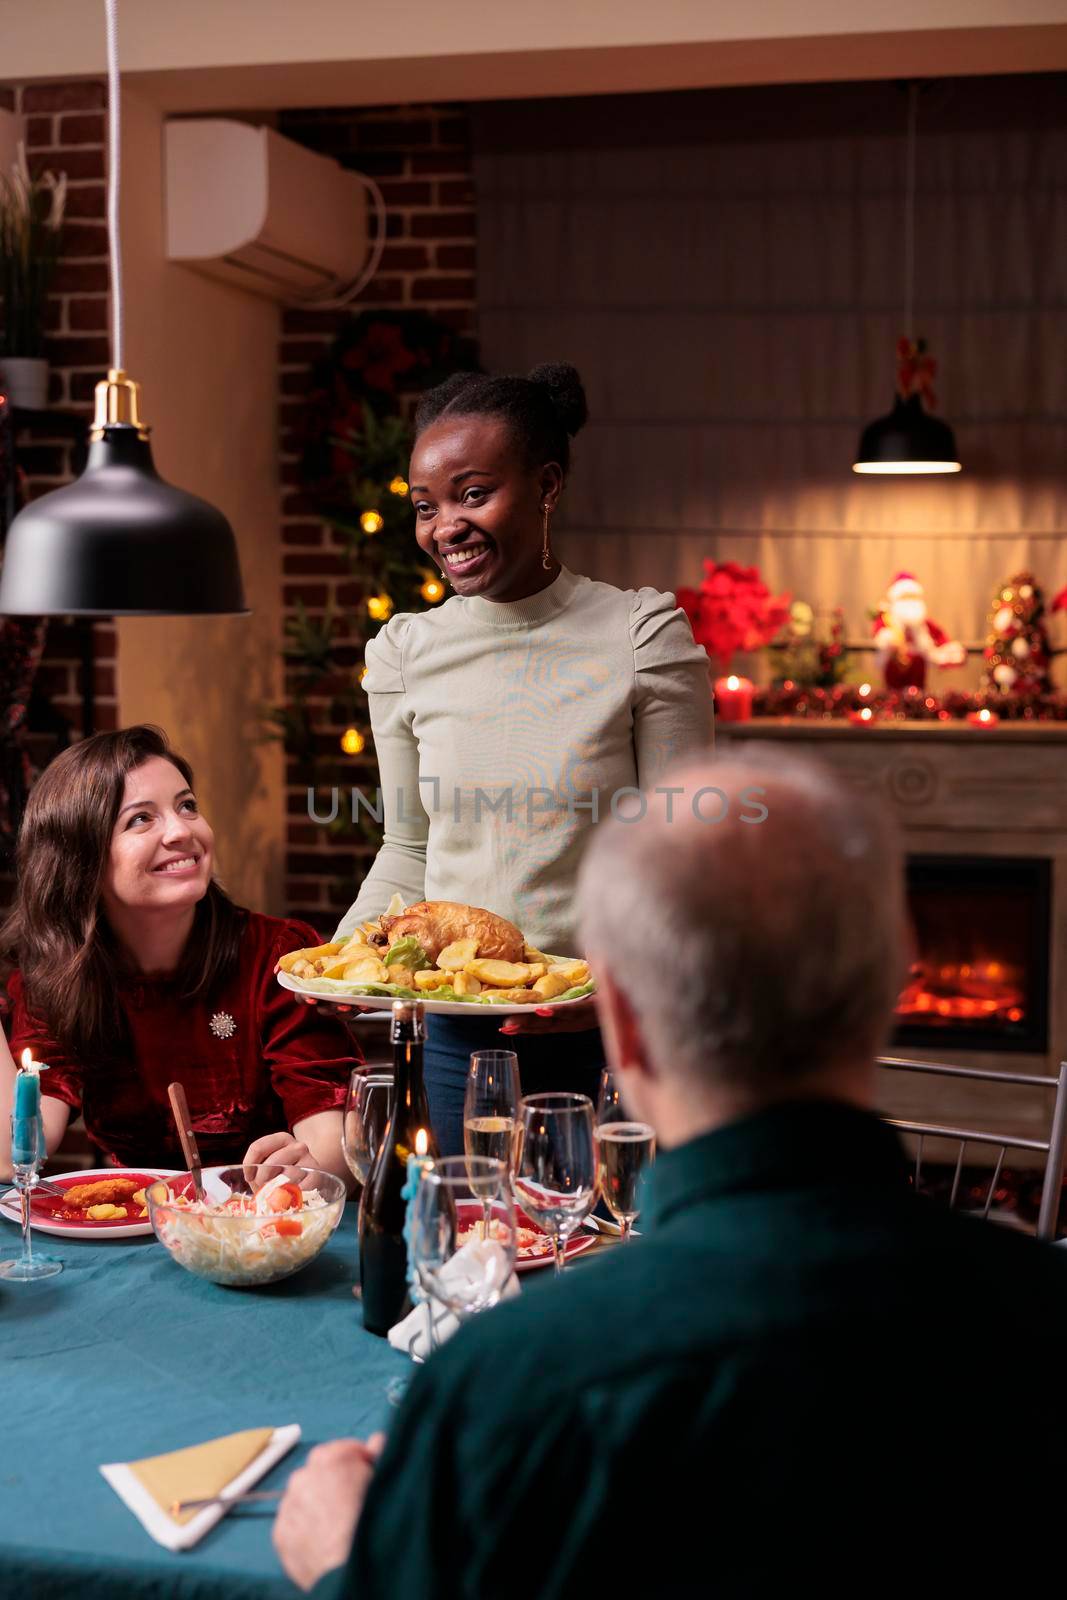 Family christmas celebration, friends gathering at festive dinner table, smiling woman holding traditional chicken. Happy diverse people eating xmas dishes, winter holiday party